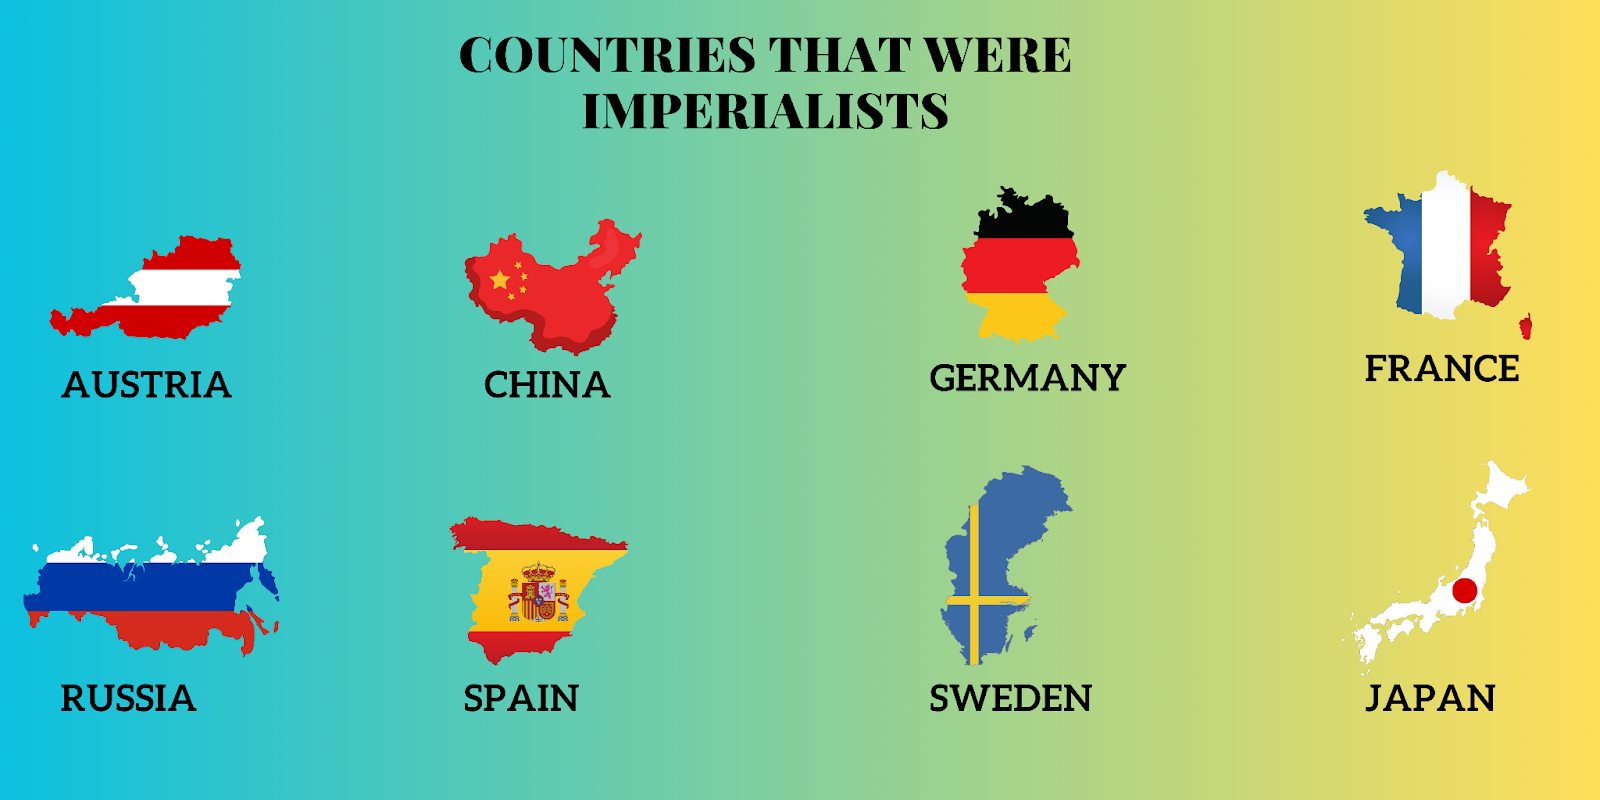 Countries that were imperialists